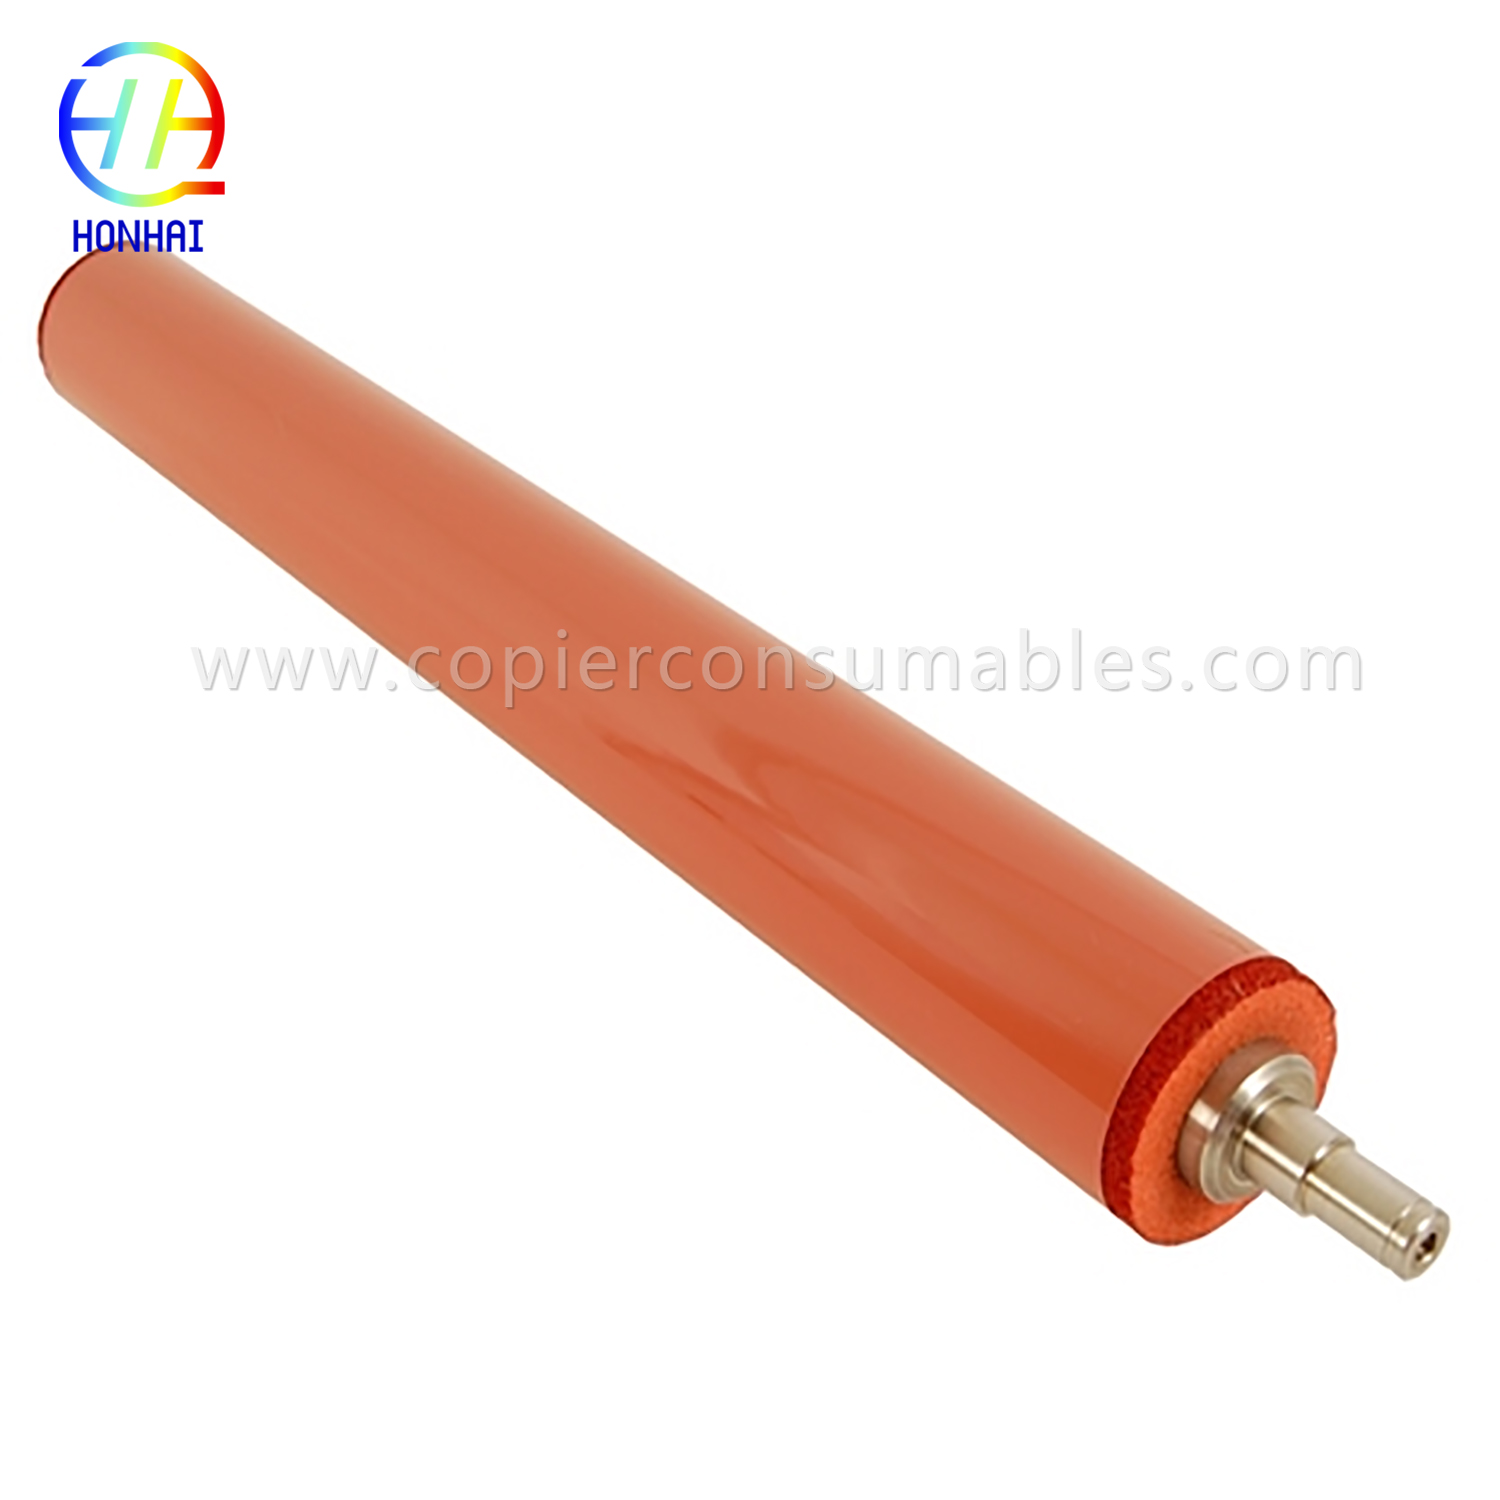 Best Price on Large Travel Hot Rollers - Fuser Heat Roller for Ricoh MPC4000 5000 AE010068 AE01-0068 OEM – HONHAI